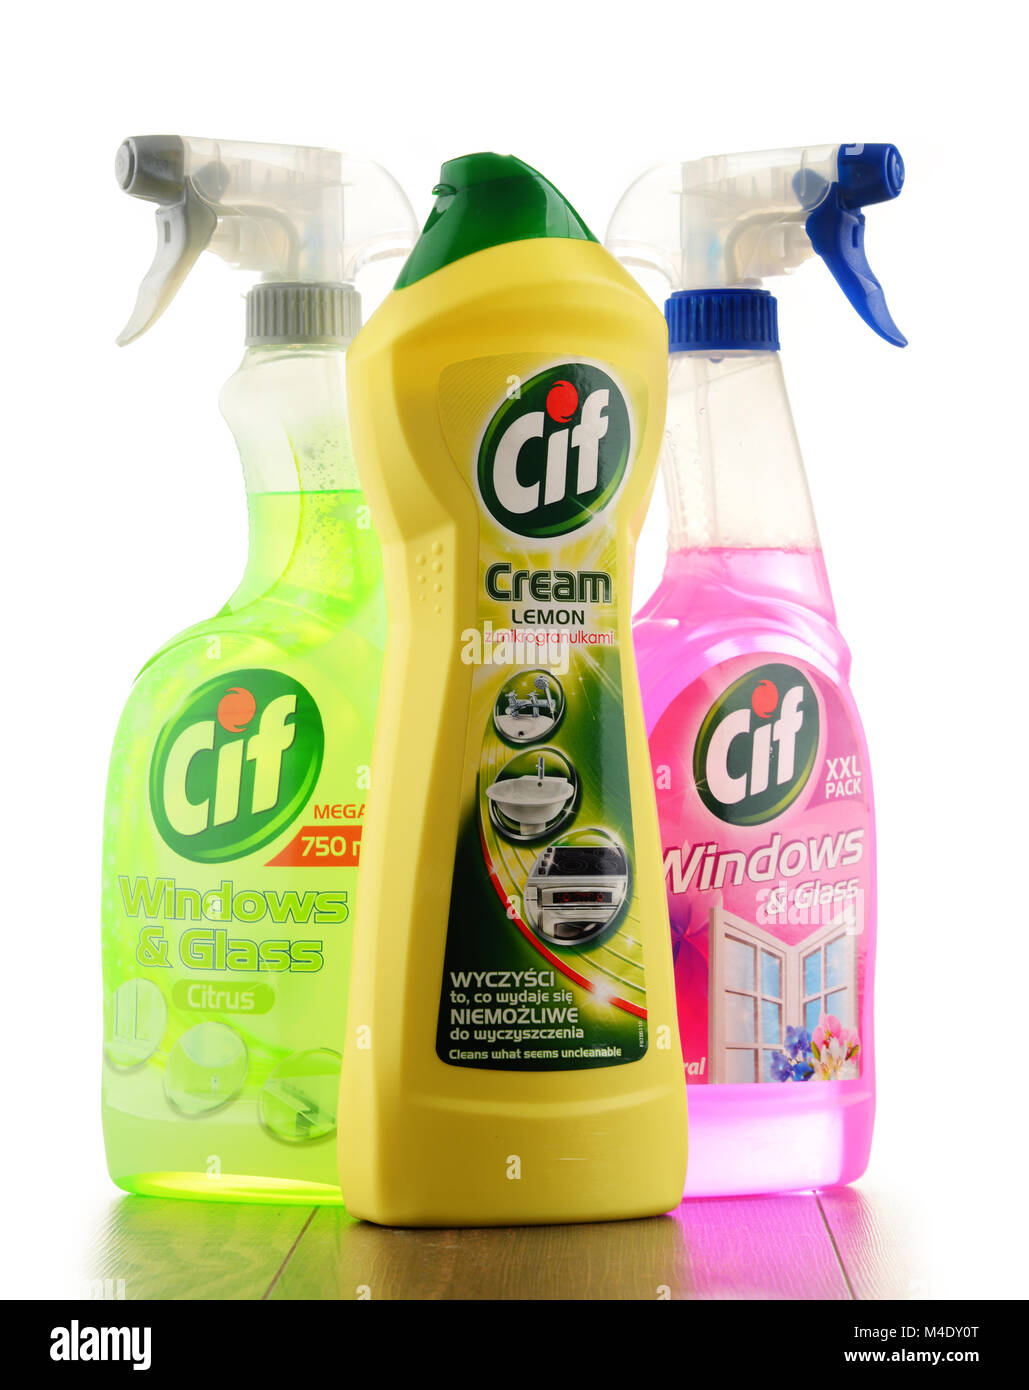 Cif Brand Of Household Cleaning Products Manufactured By Unilever Stock Photo Alamy